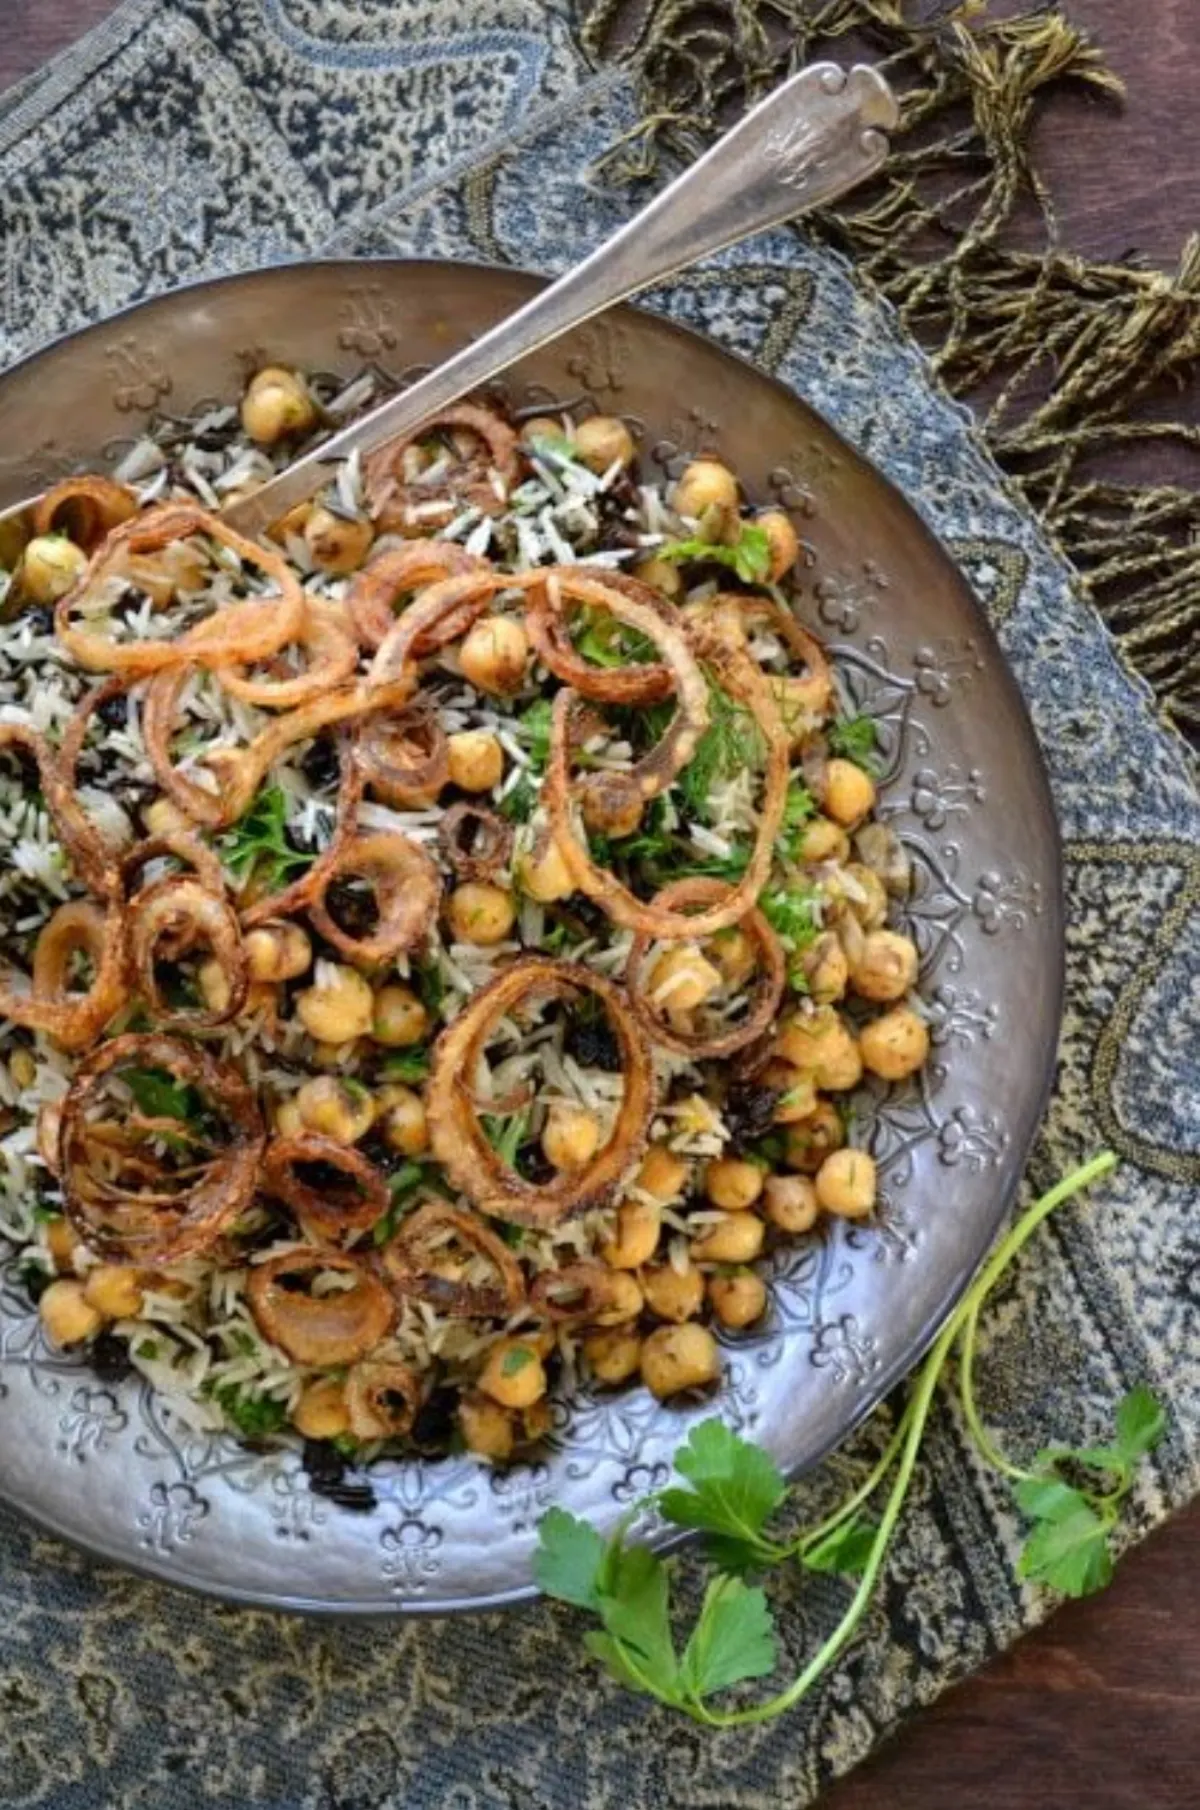 Basmati and Wild Rice with Chickpeas, Currants and Herbs